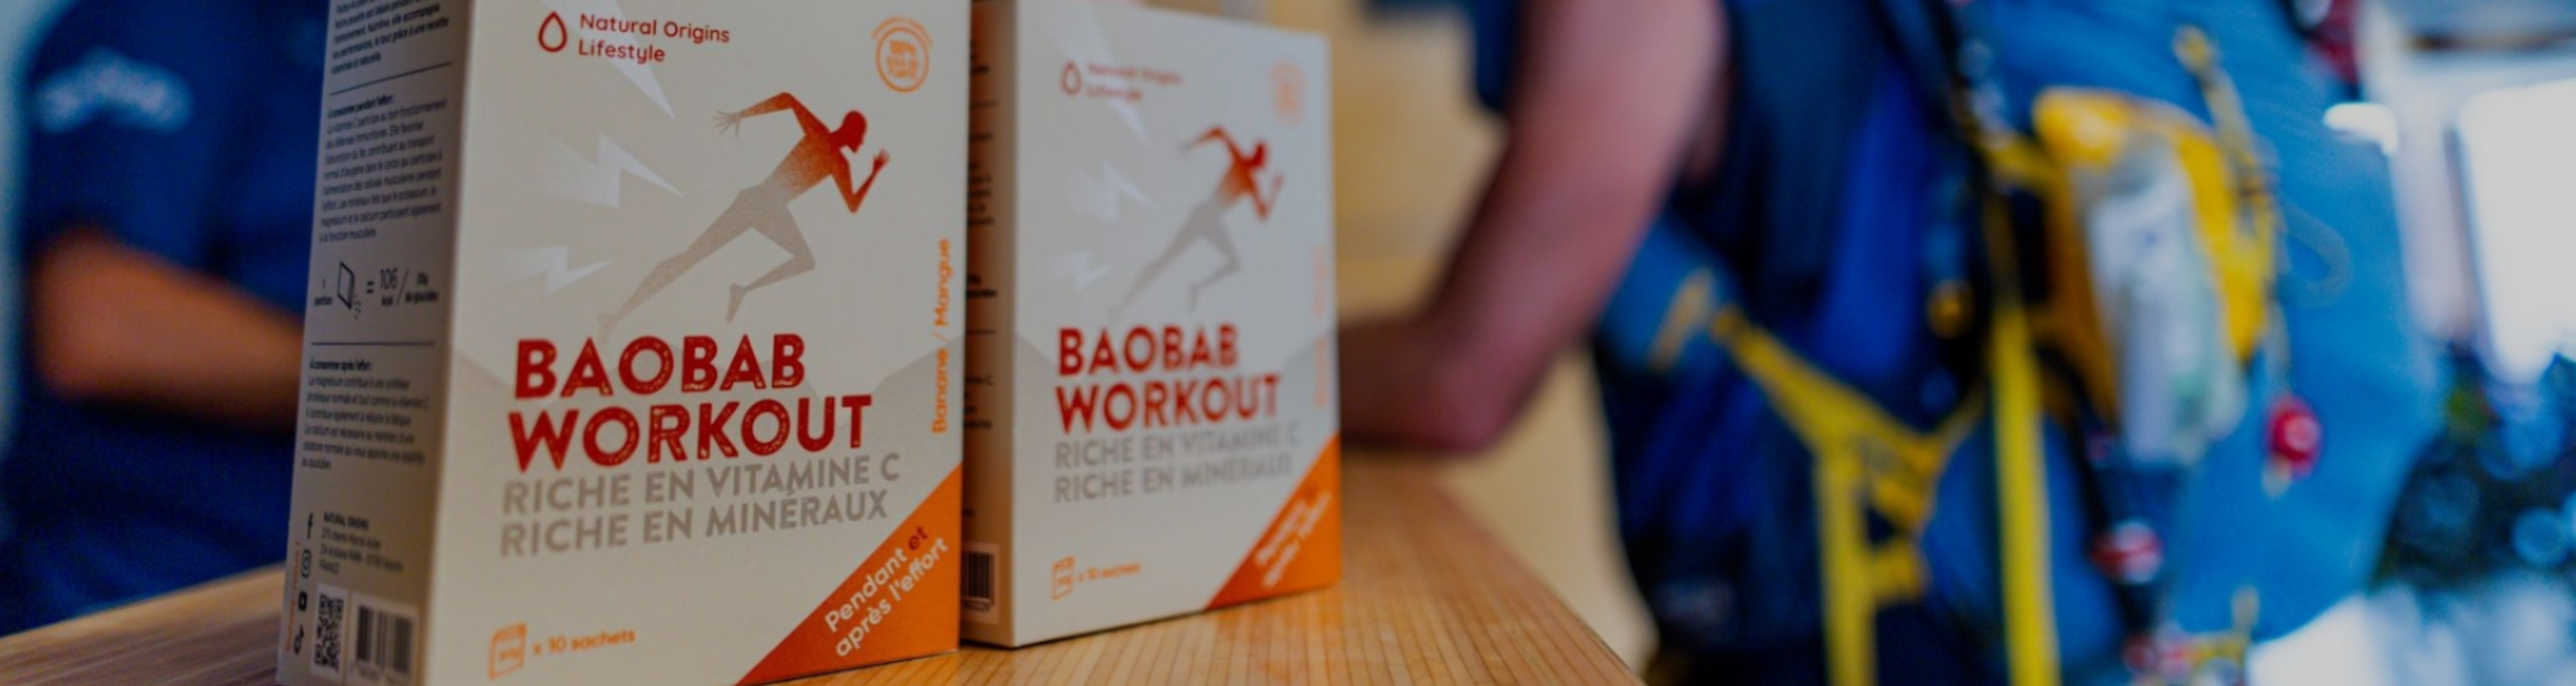 The new format for Baobab Workout, the athlete's ally with Natural Origins Lifestyle!